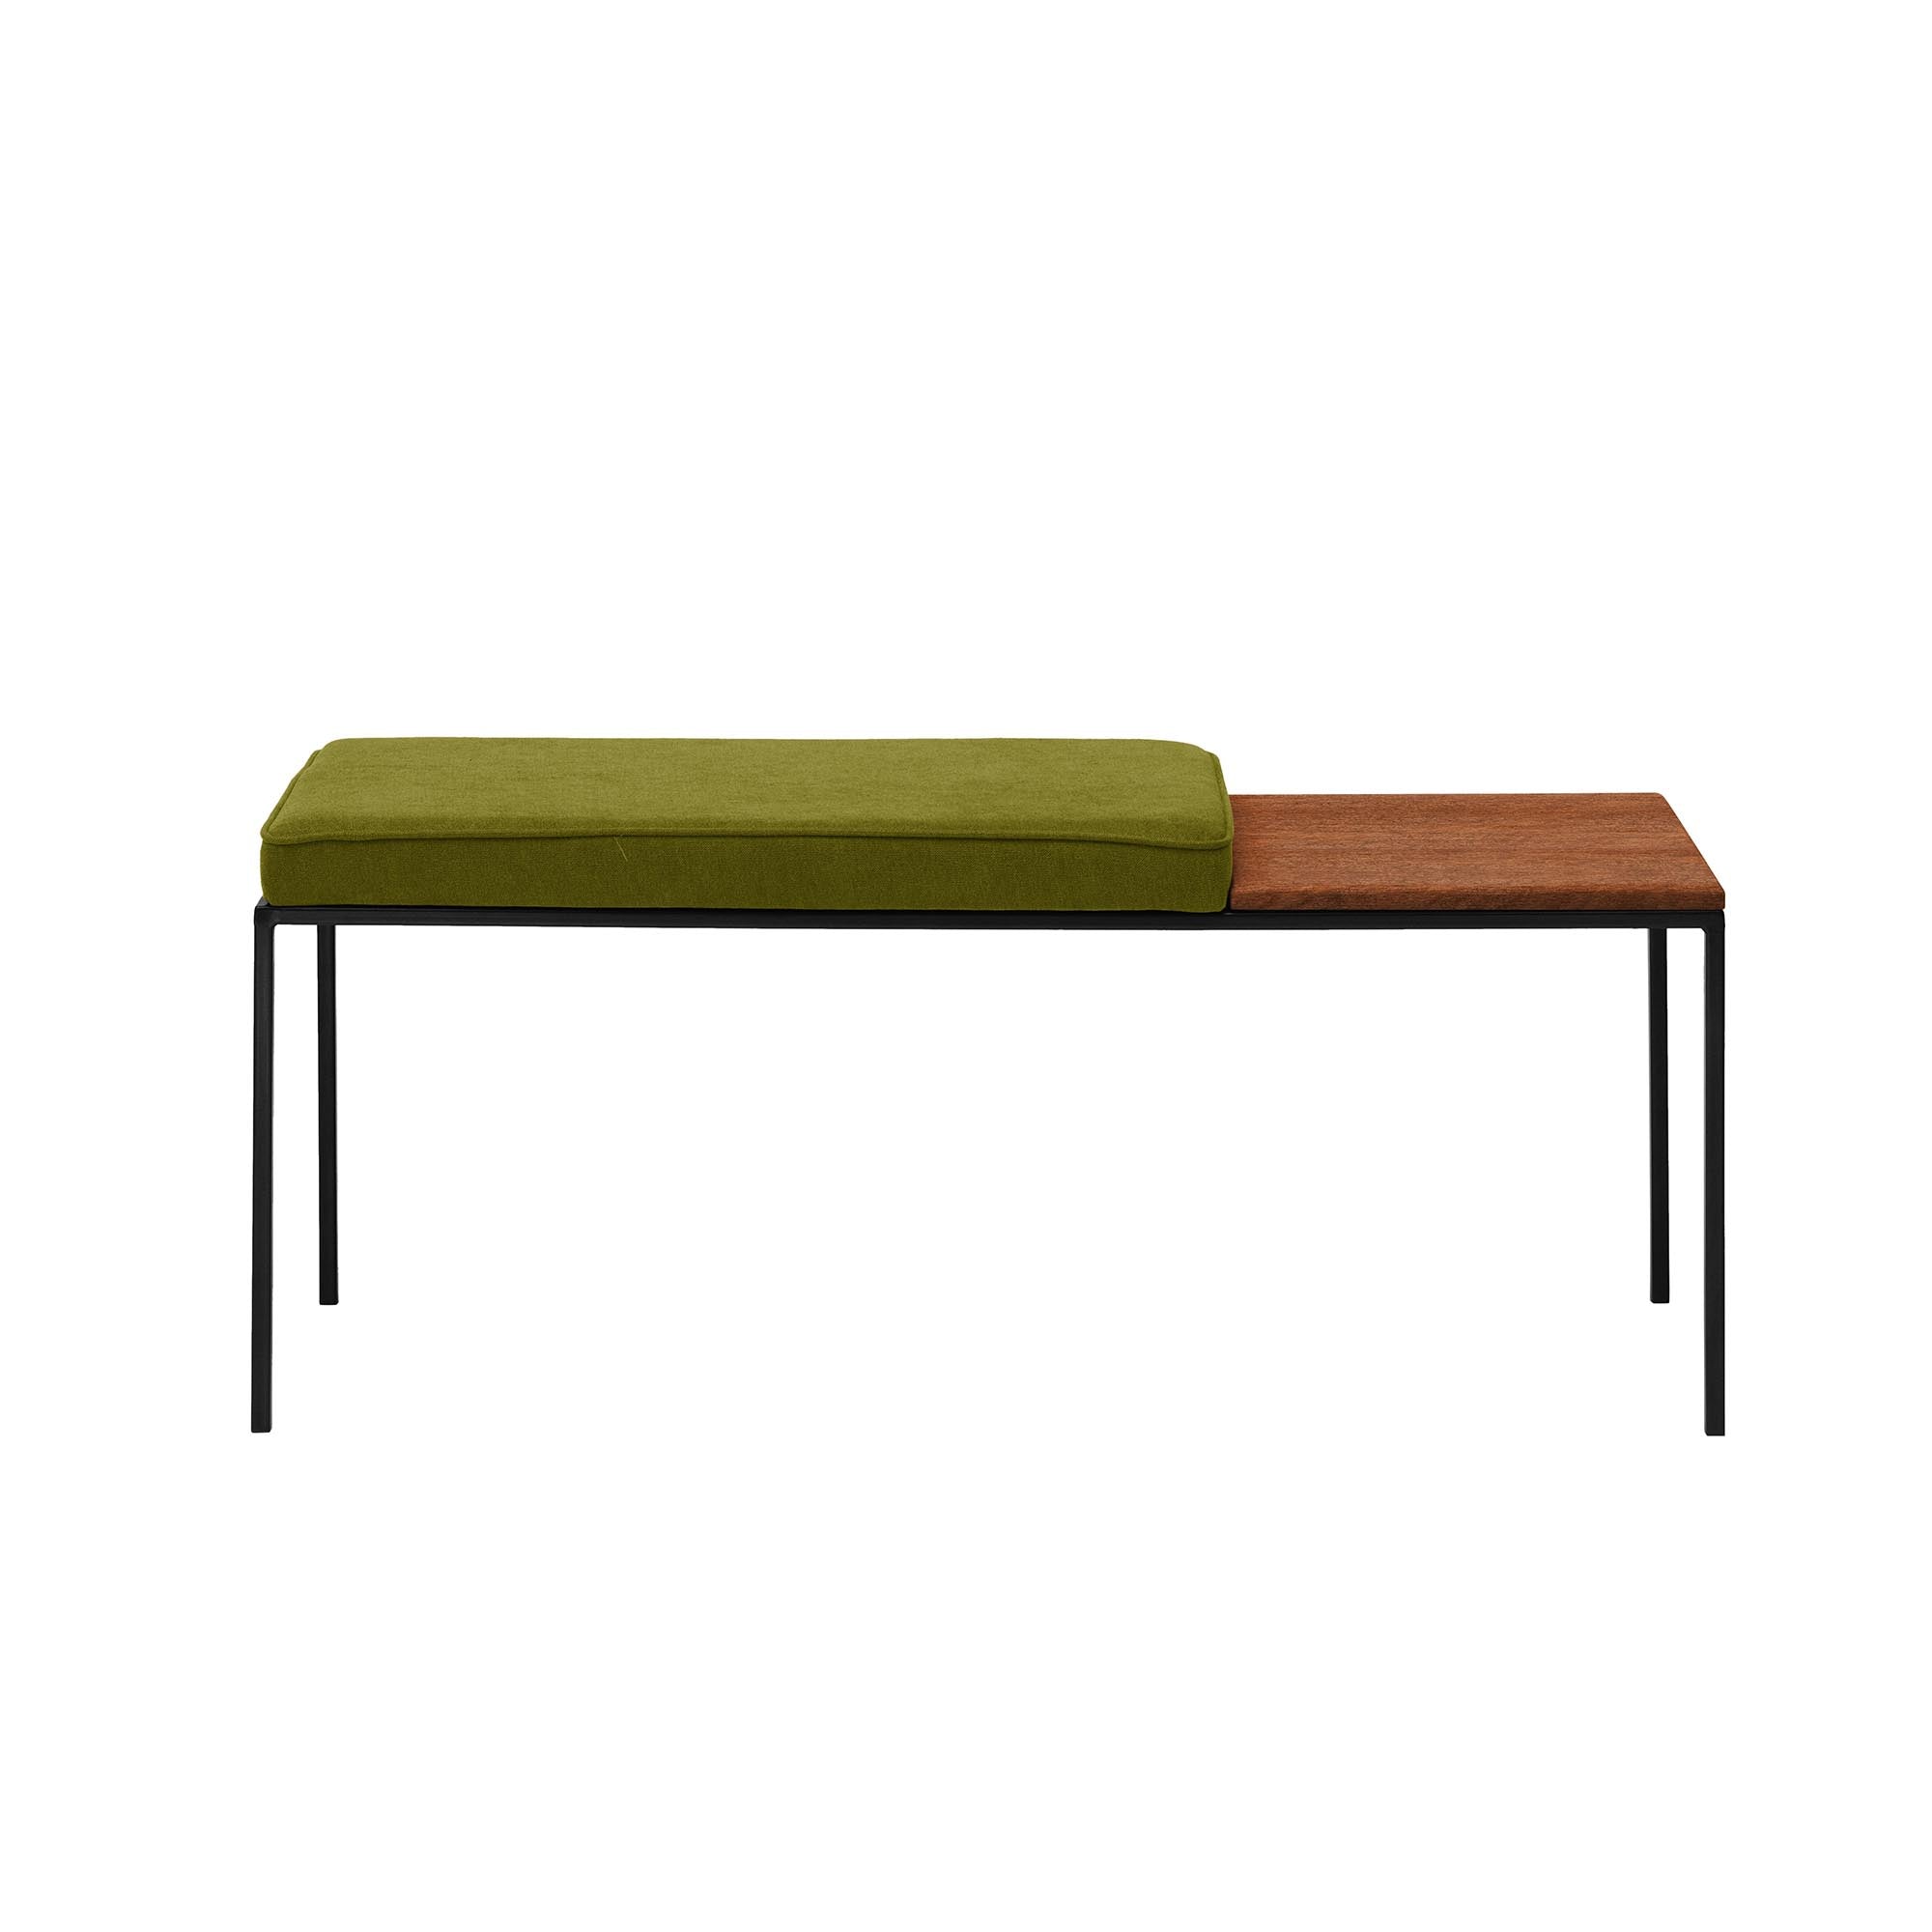 Beech Wood Seat, Walnut Colour green fabric, black frame, front view